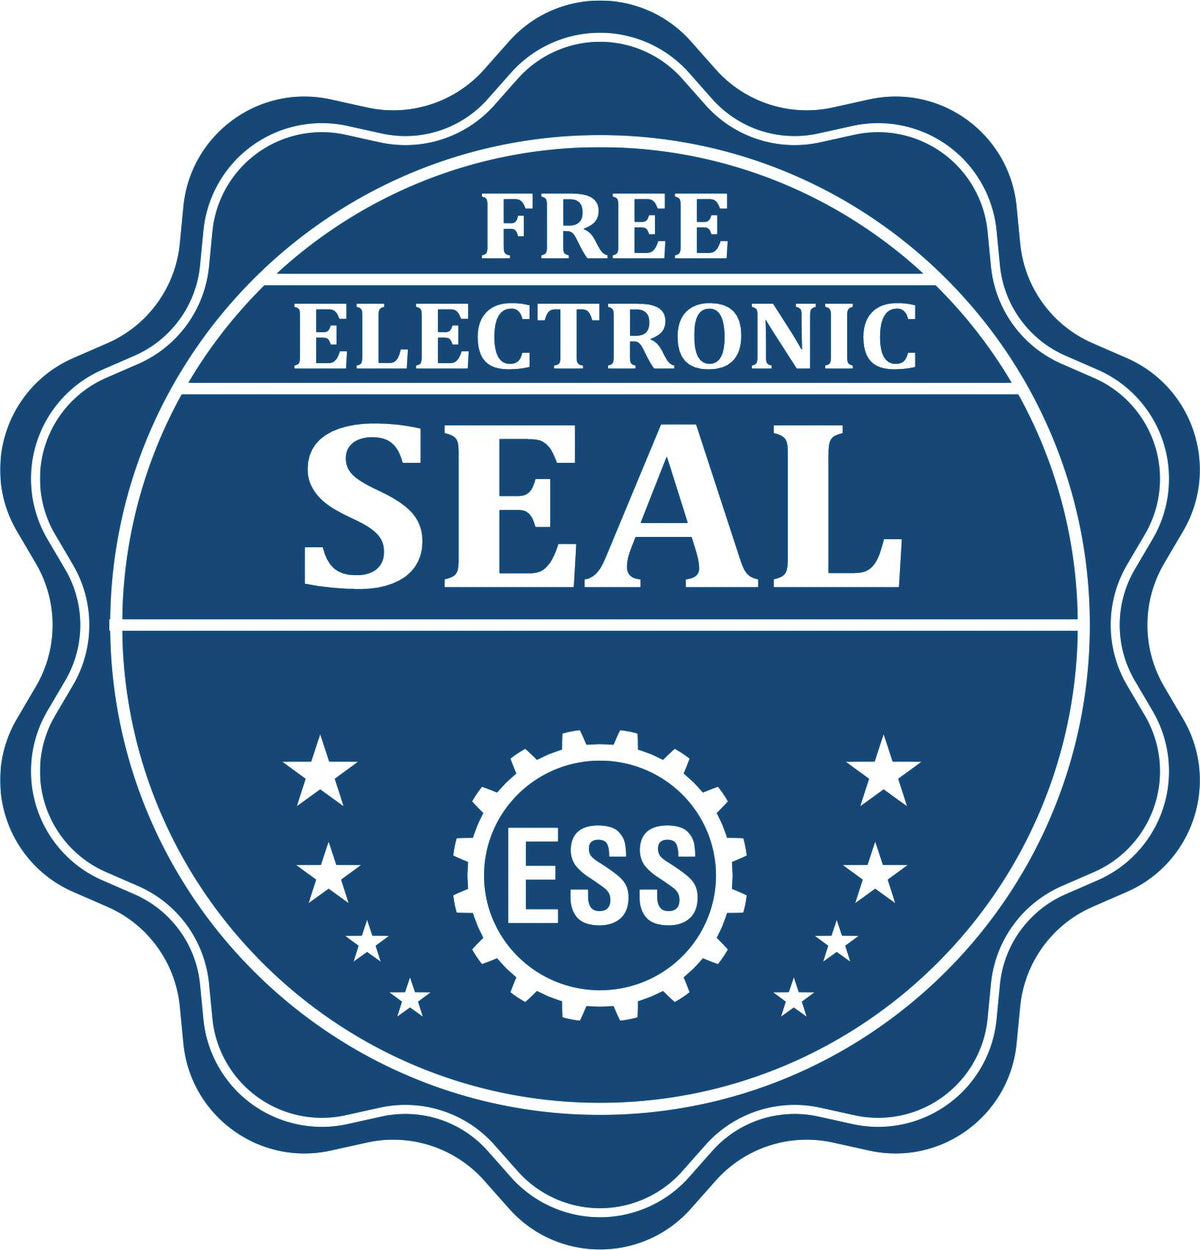 A badge showing a free electronic seal for the State of Pennsylvania Extended Long Reach Geologist Seal with stars and the ESS gear on the emblem.